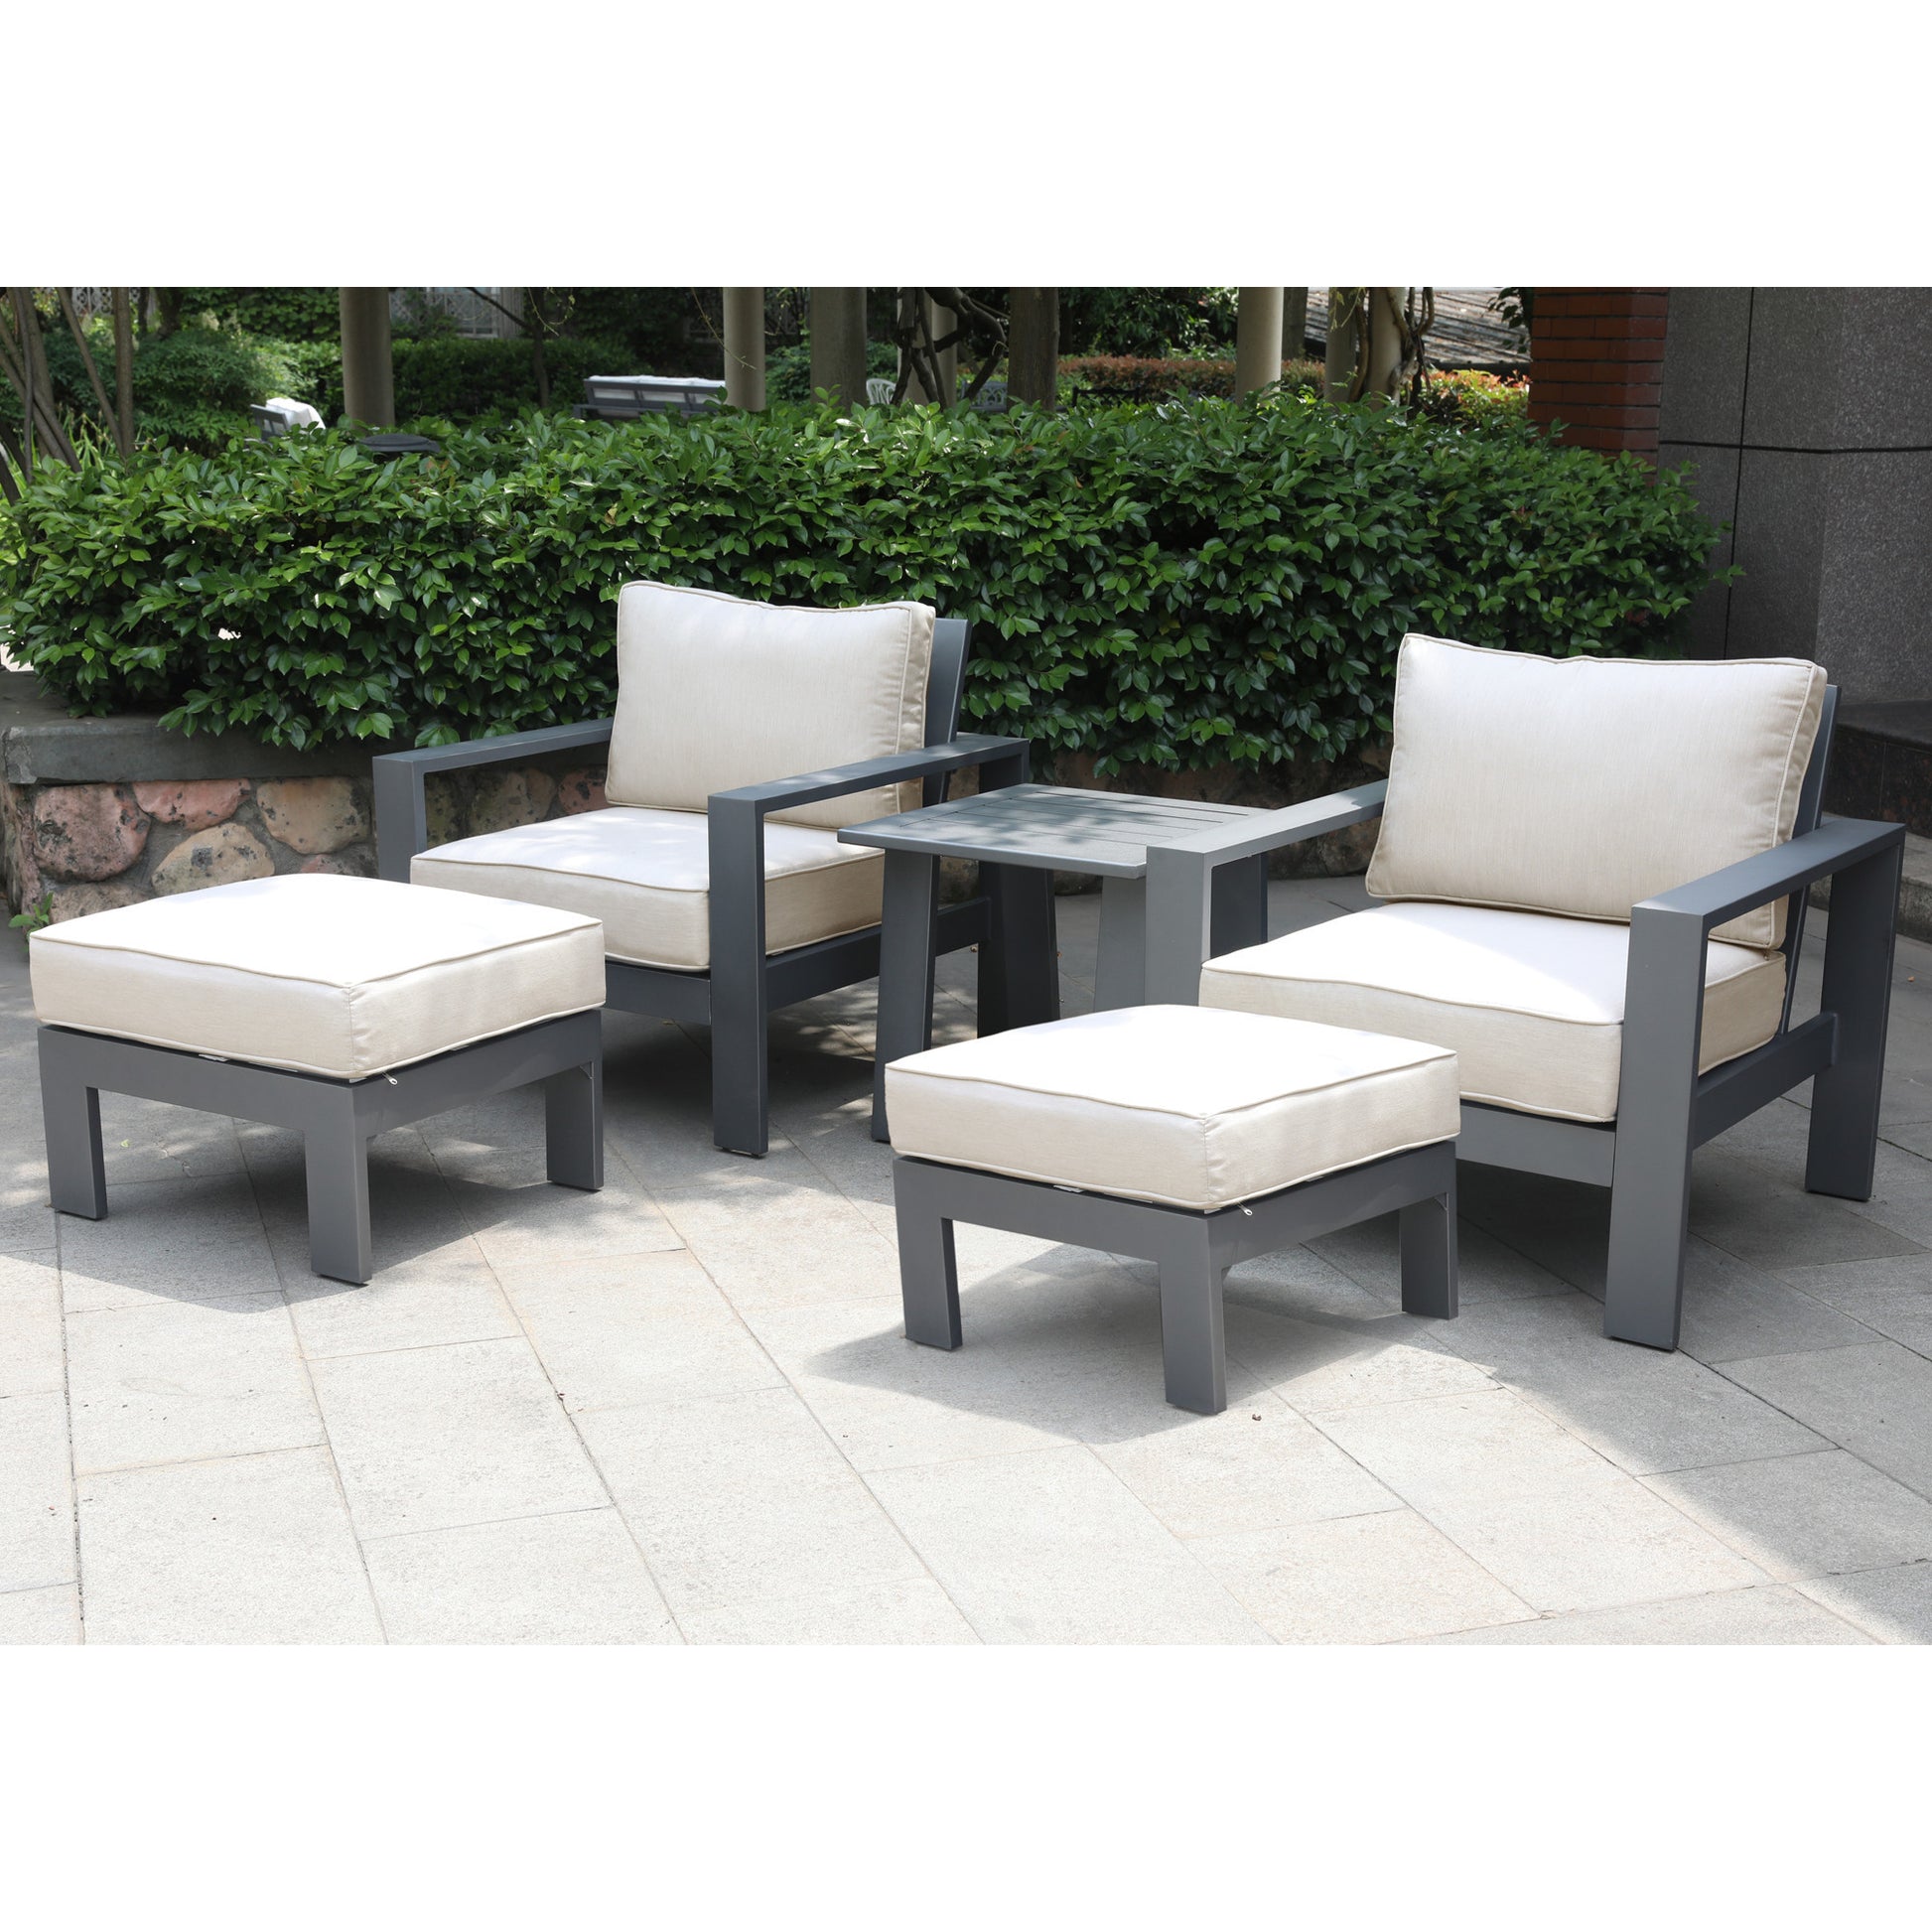 5 Piece Seating Group with Cushions, Powdered Pewter pewter-polyester-aluminum